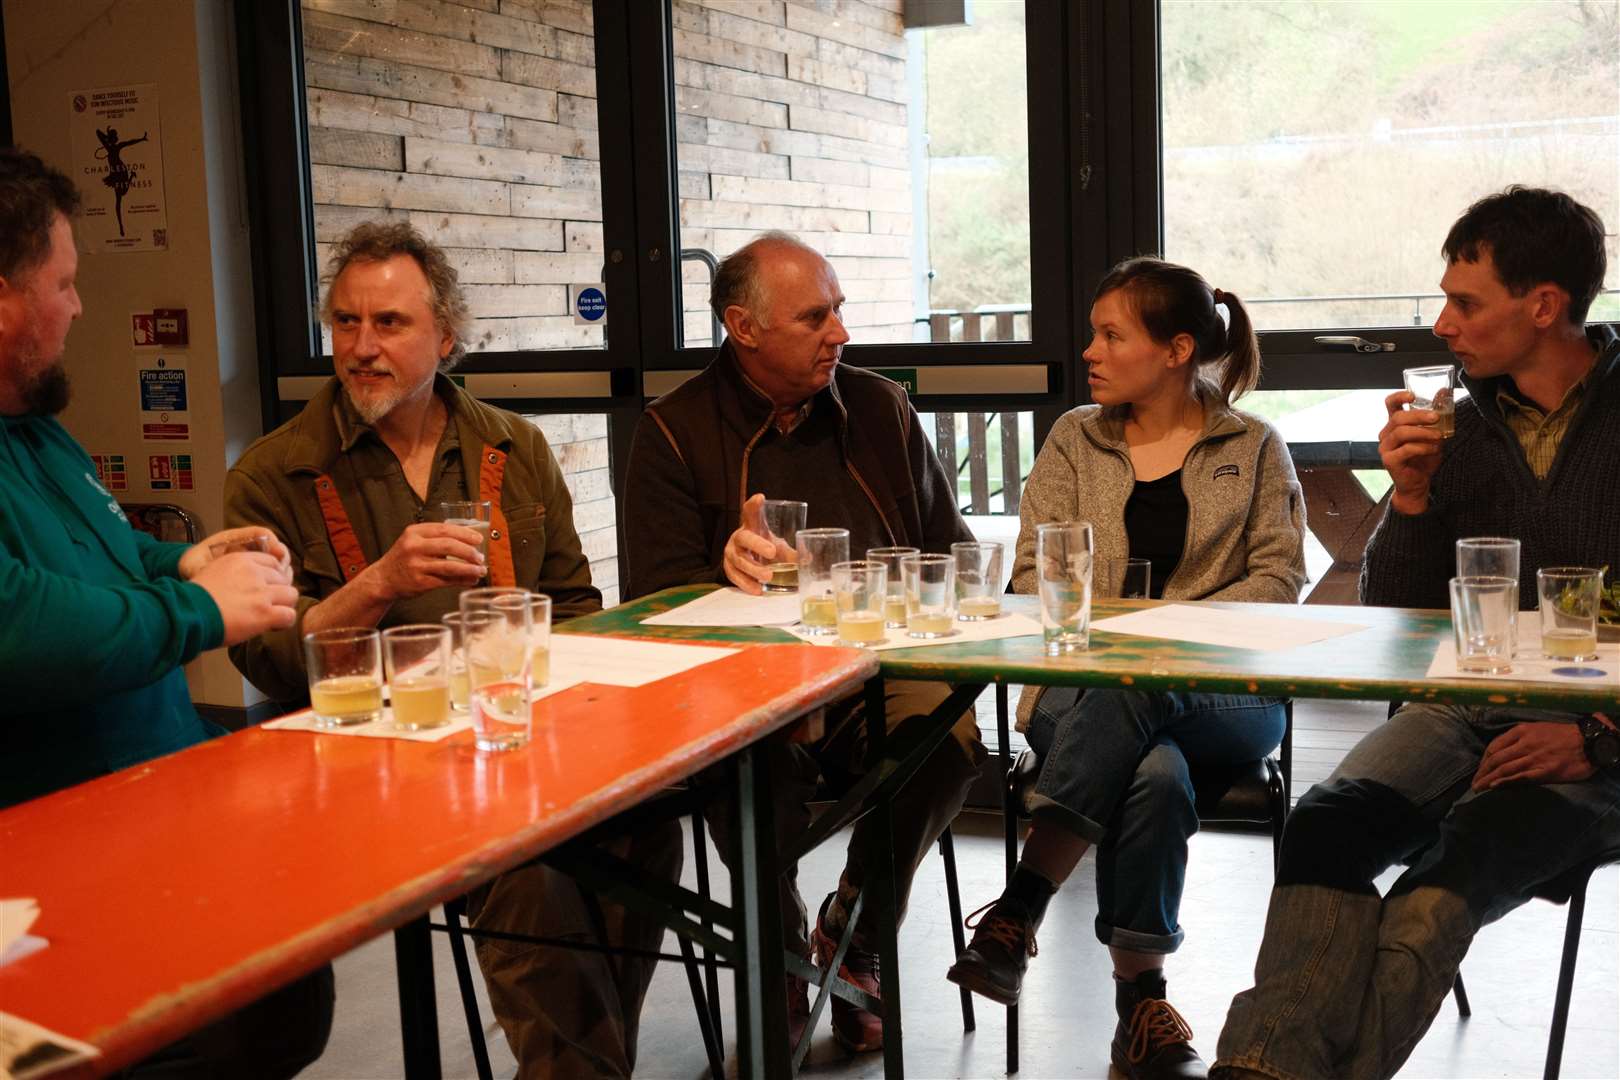 (L-R), Rich Davies, Greg Pilley, John Walker, Rebecca Swinn and Tom Upton at a tasting trial for new hops varieties in Stroud Brewery, Stroud, Gloucestershire (Sam Oliver/Stroud Brewery/PA)